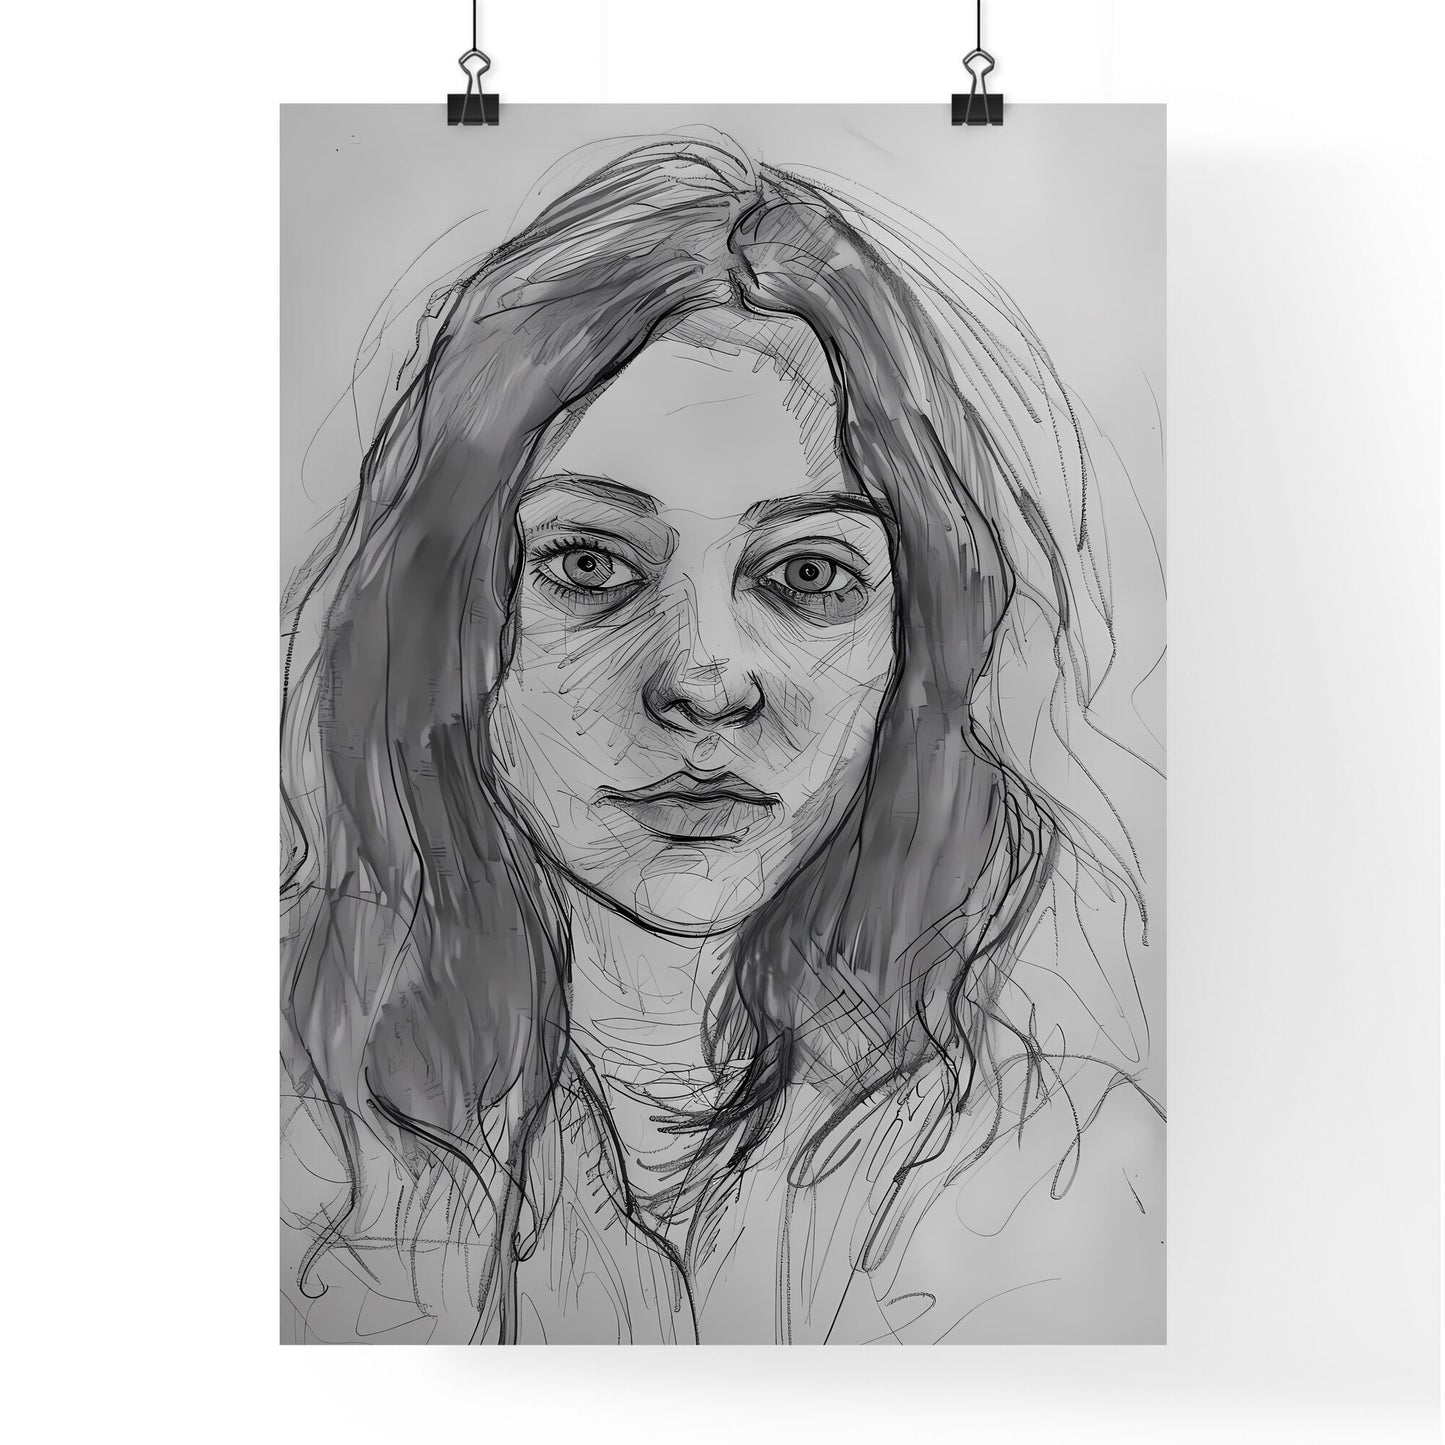 Pencil Sketch of Woman with Long Hair: Vibrant, Impressionistic Art of Mysterious Eyes and Feminine Beauty Default Title